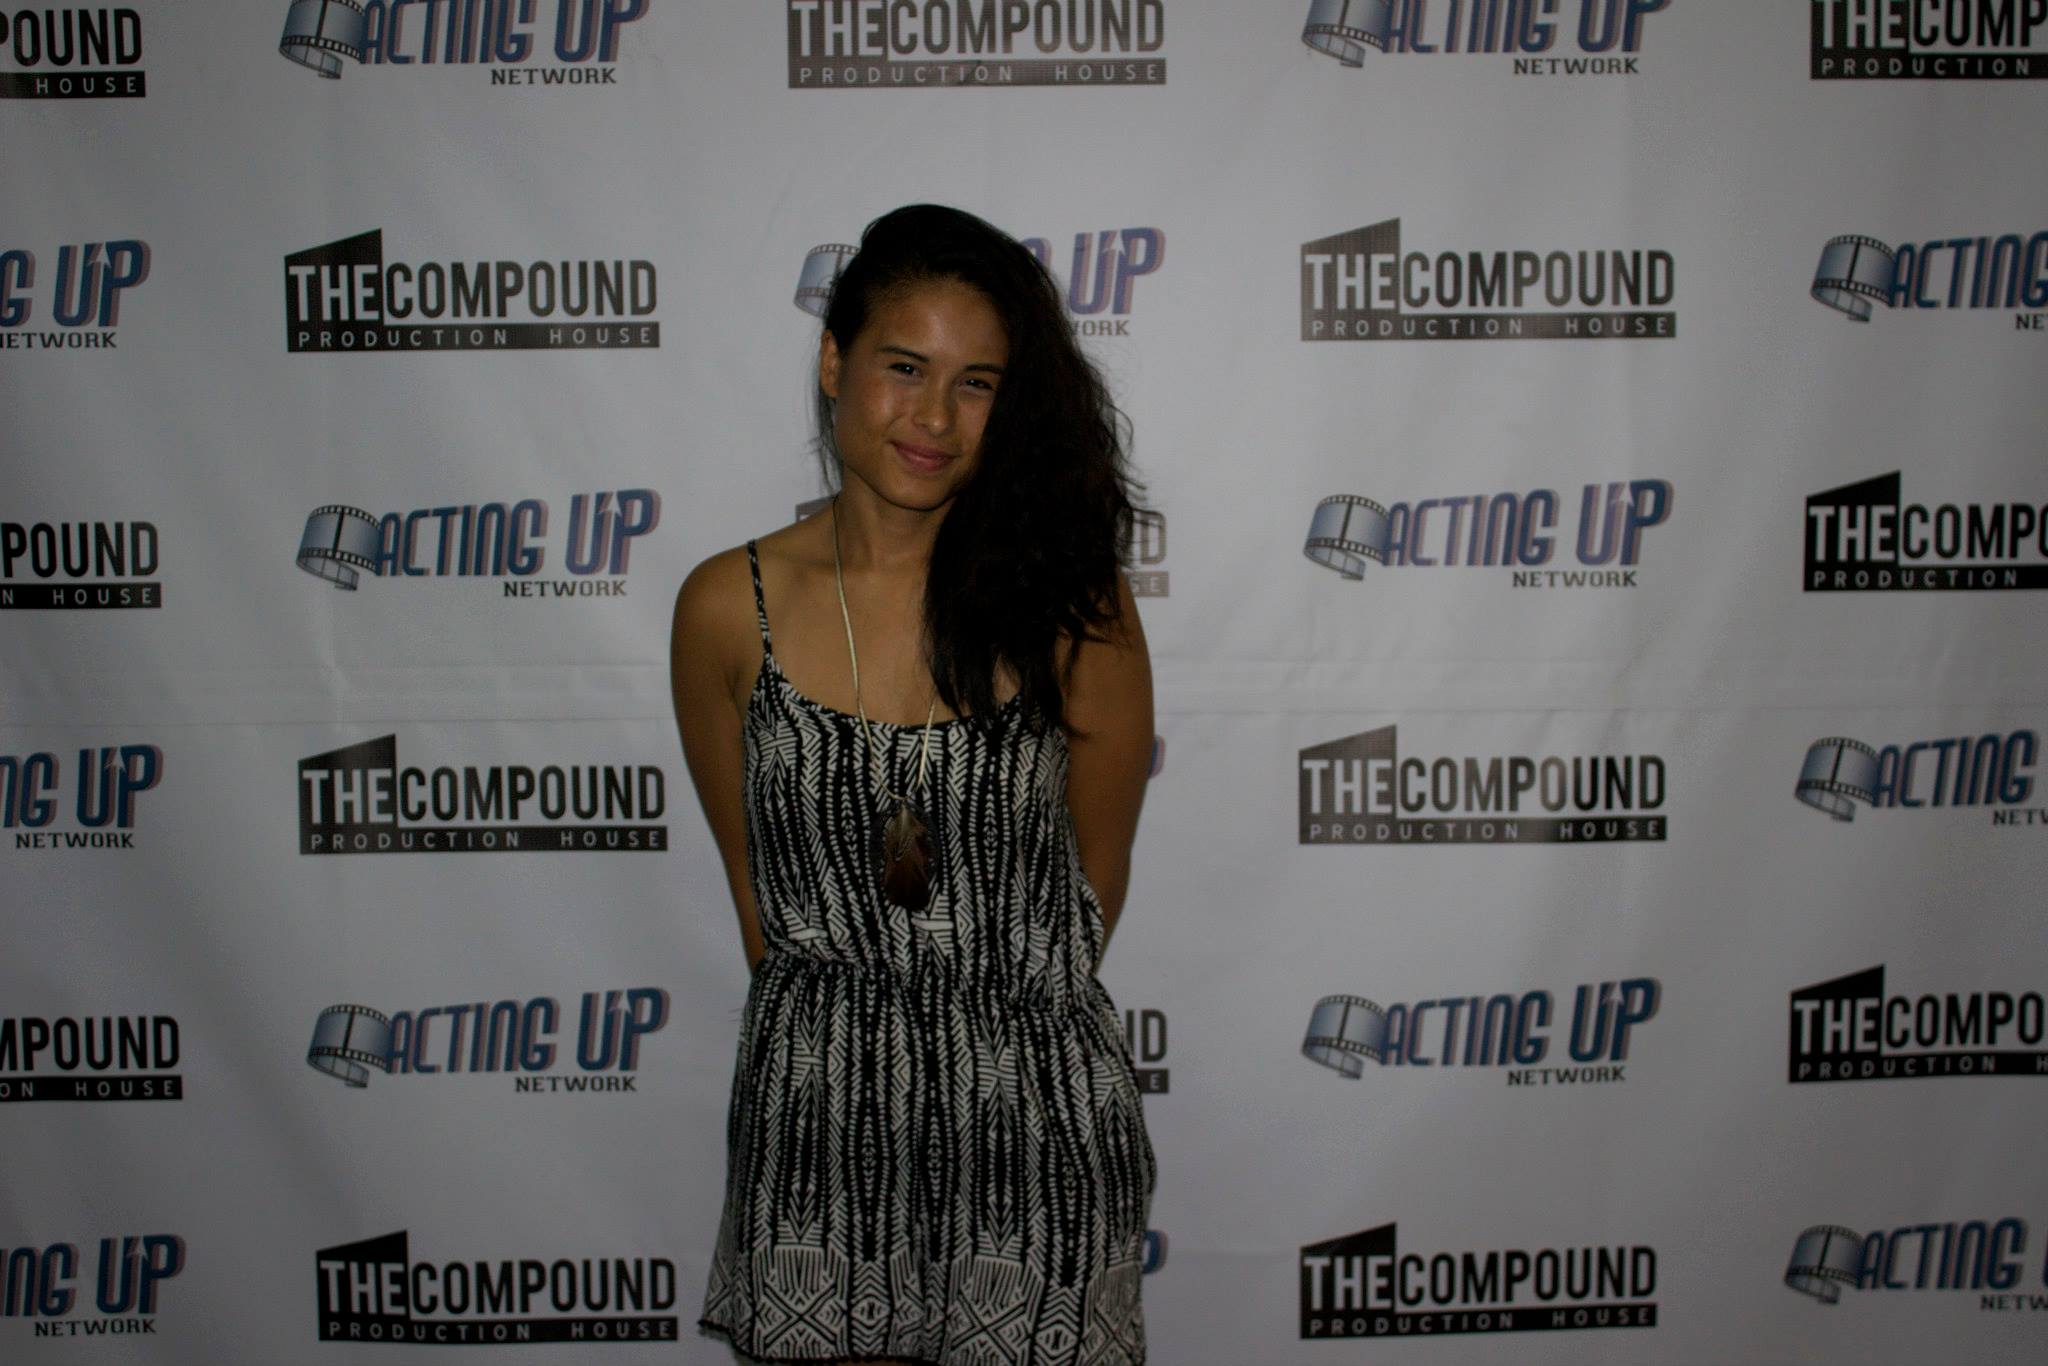 Representing A Period Drama at Acting UP Network's #DIRECTEDBYWOMEN Screening!